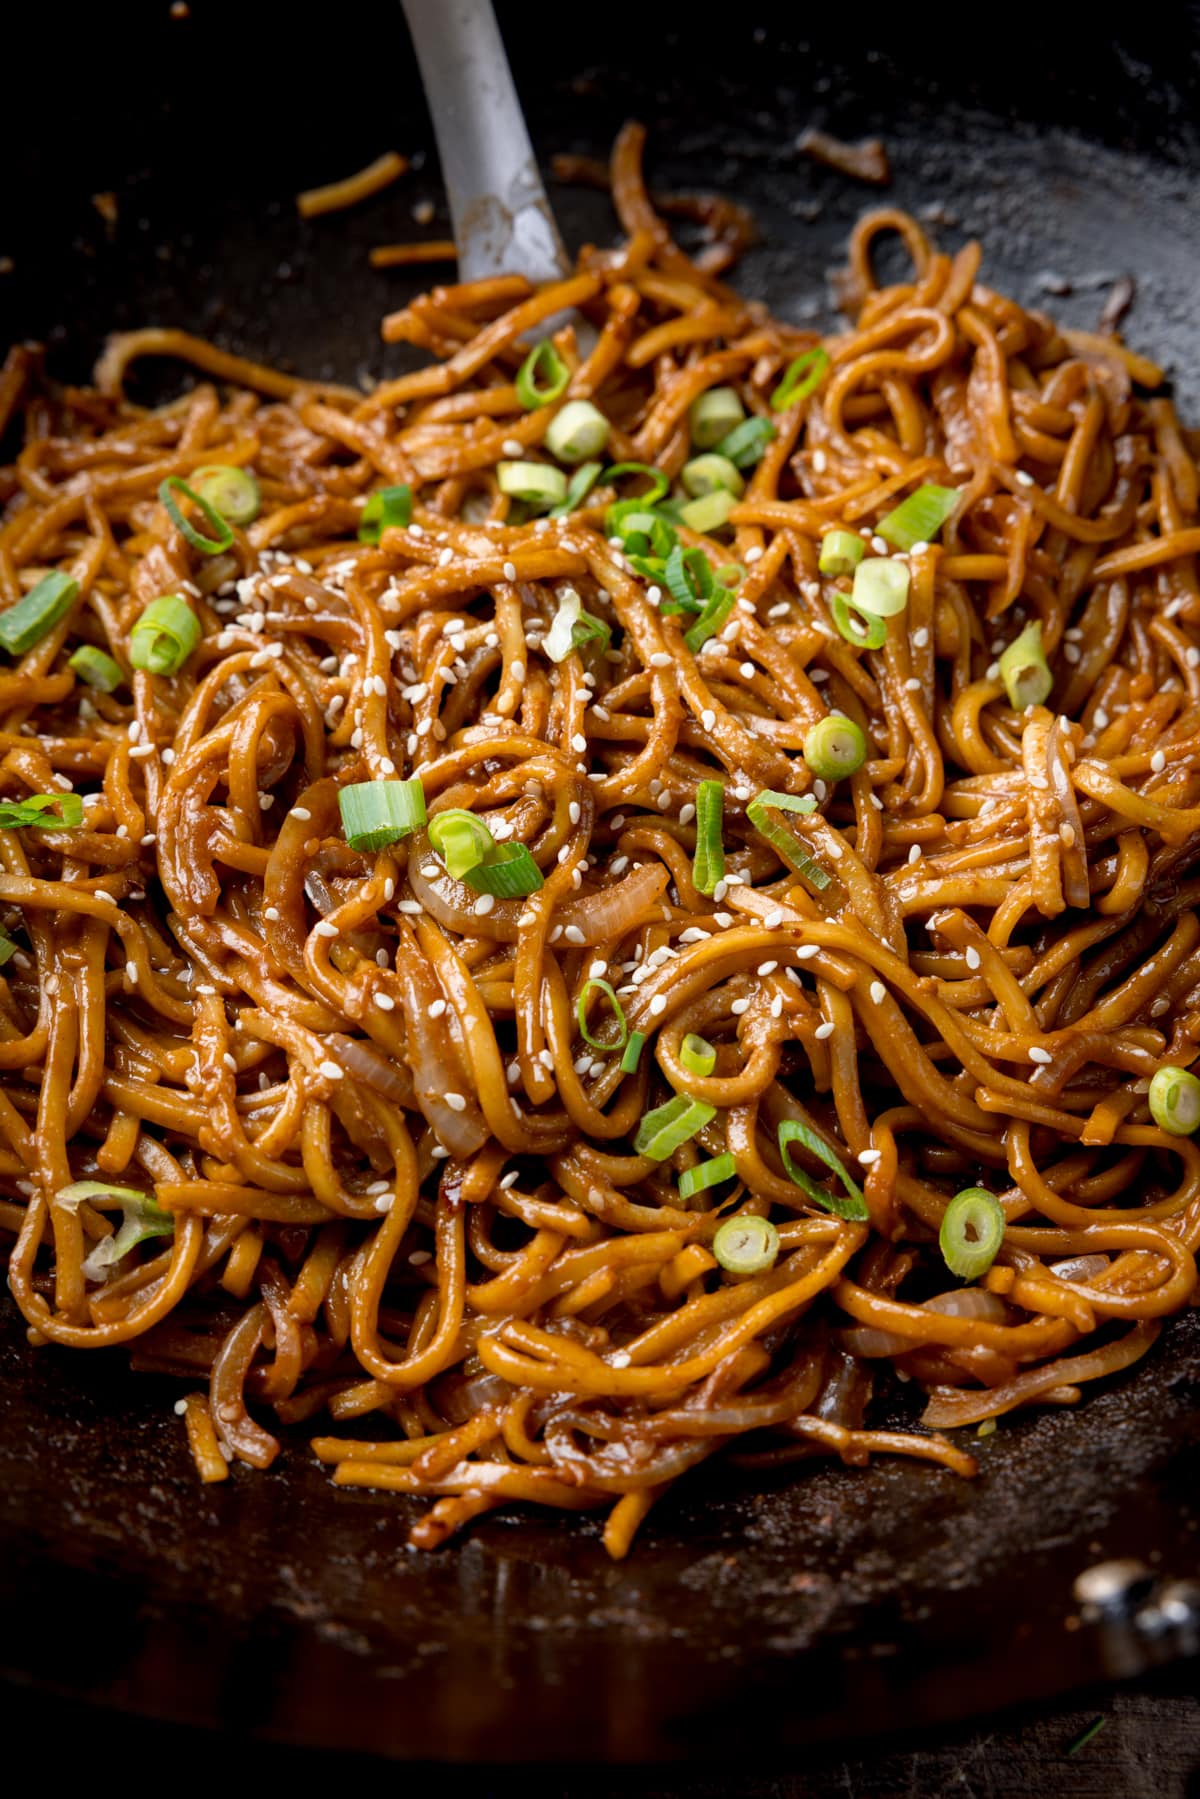 Close up image of sesame noodles topped with spring onions and sesame seeds in a dark wok. The handle of a spatula can be seen sticking out of the noodles.